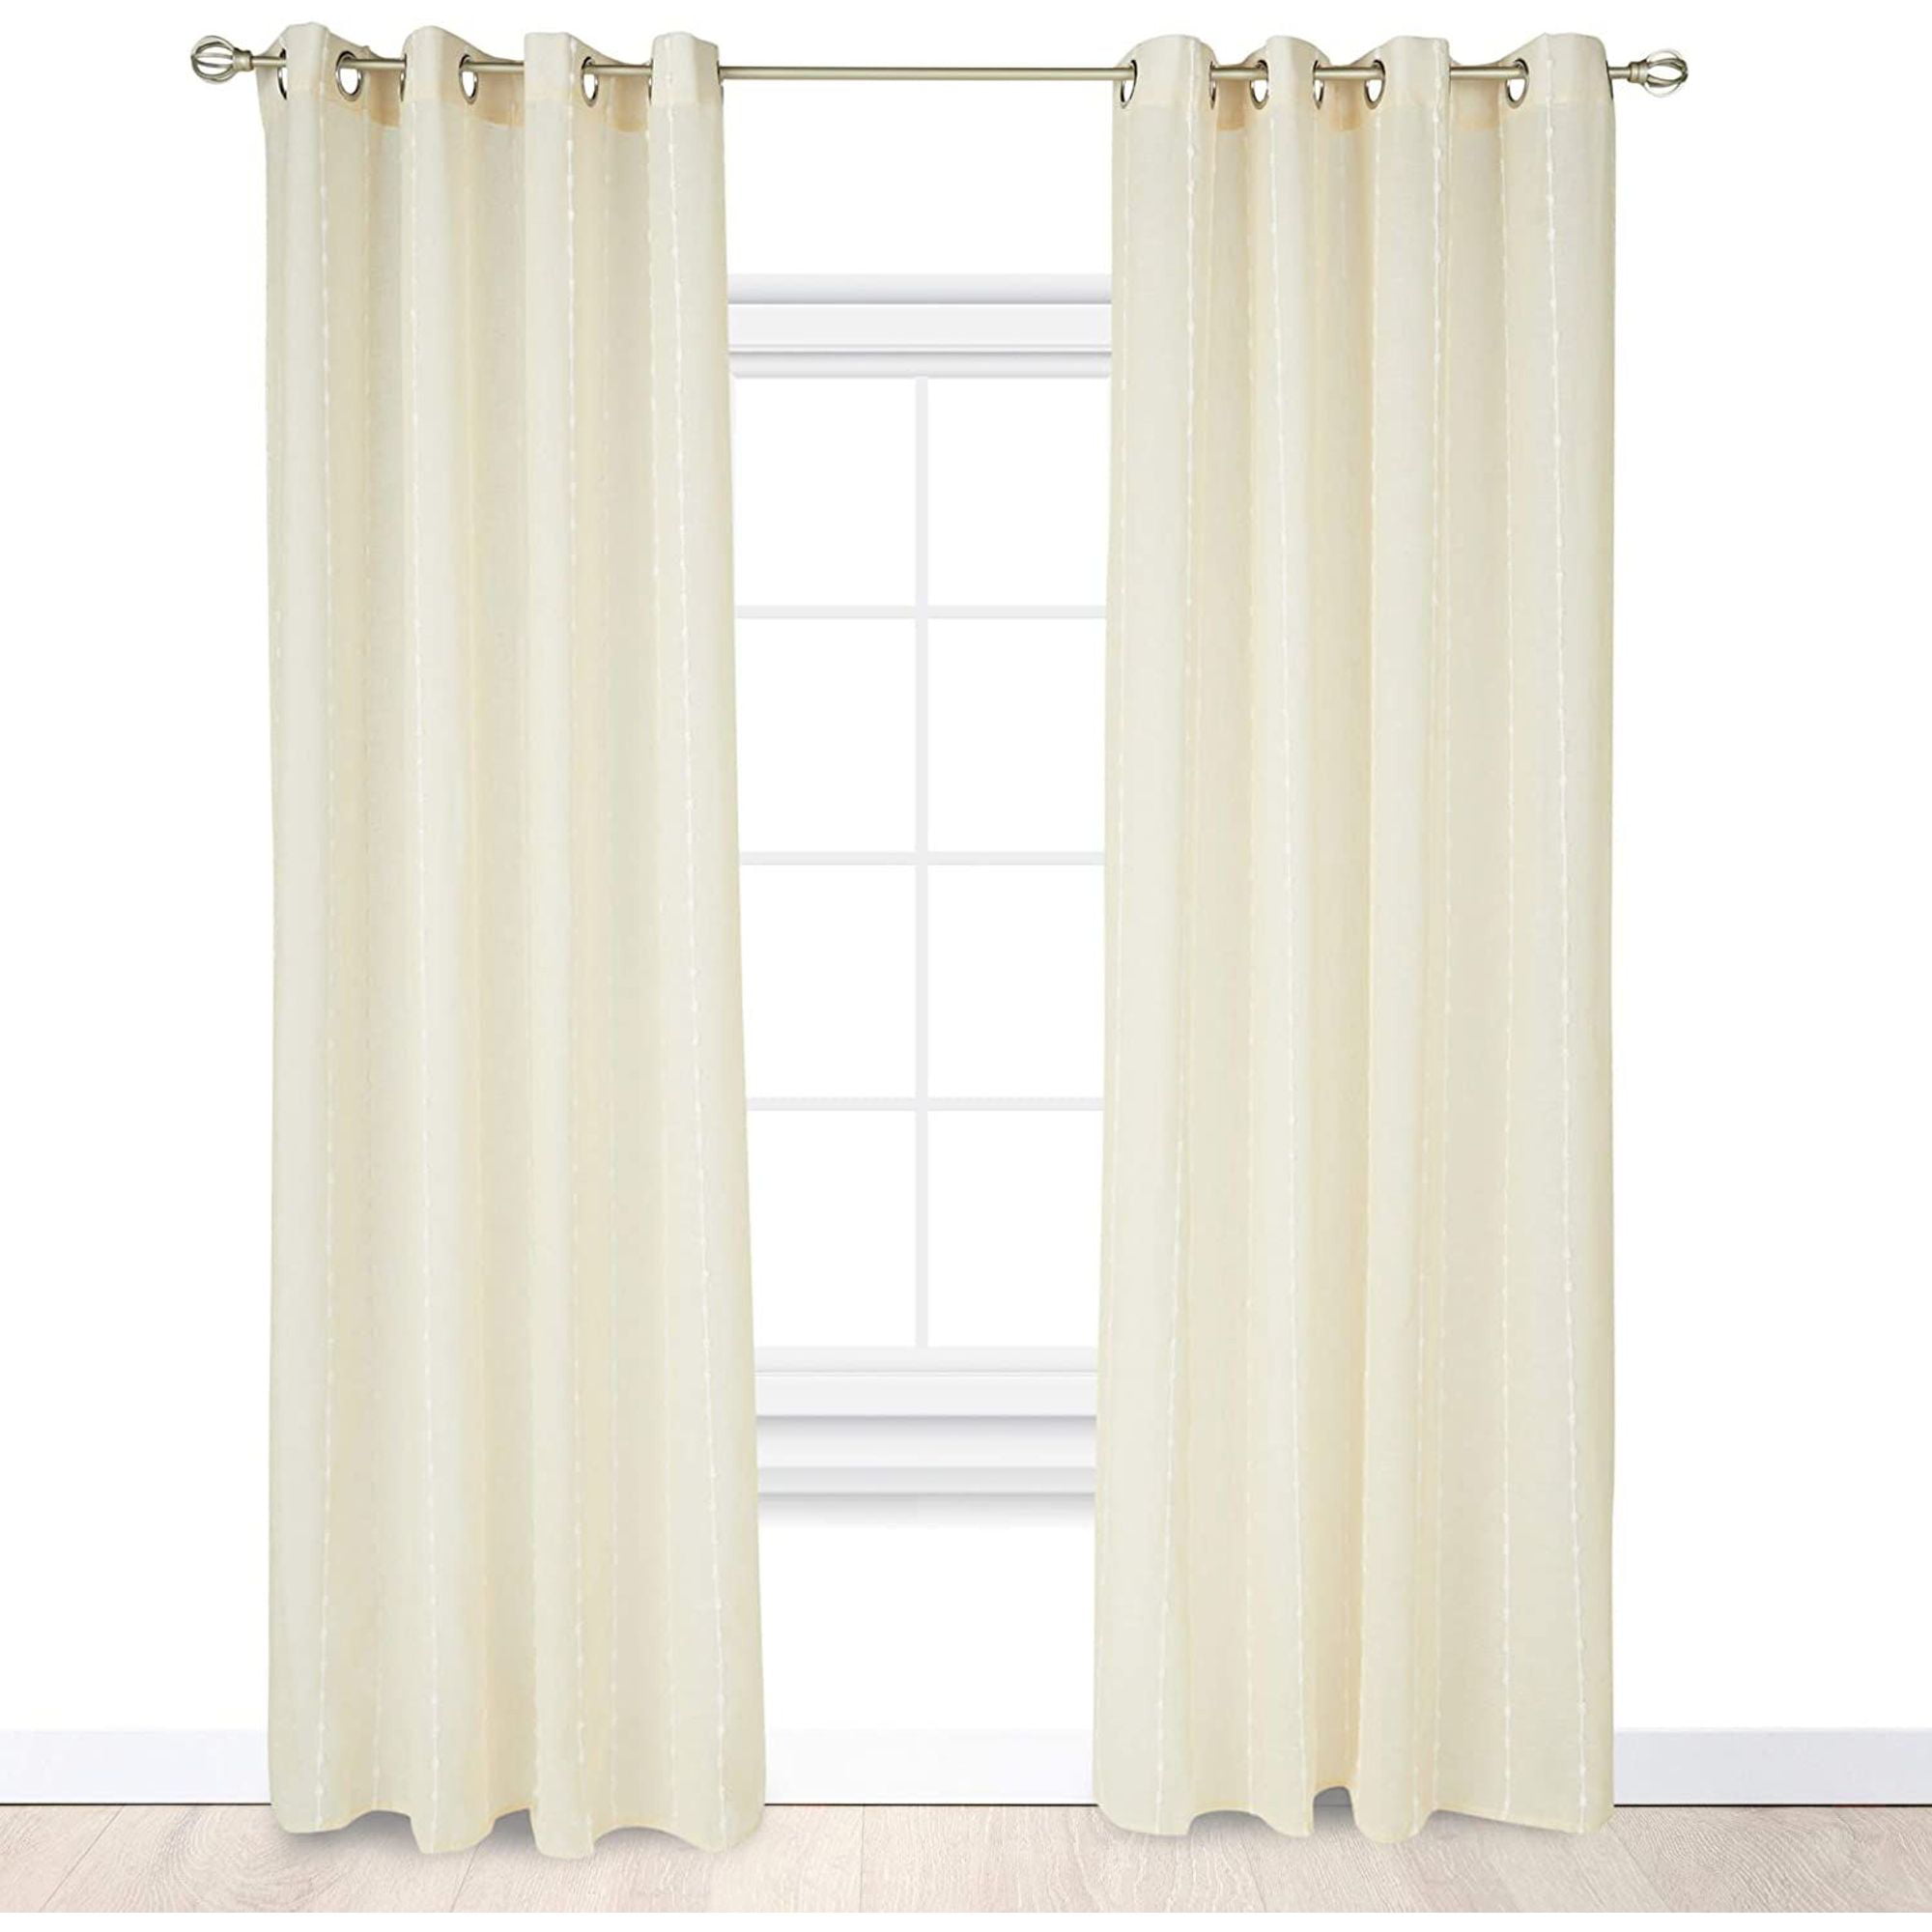 Ivory Sheer Grommet Curtains 84 Inch, 84 Inch Curtains For Living Room